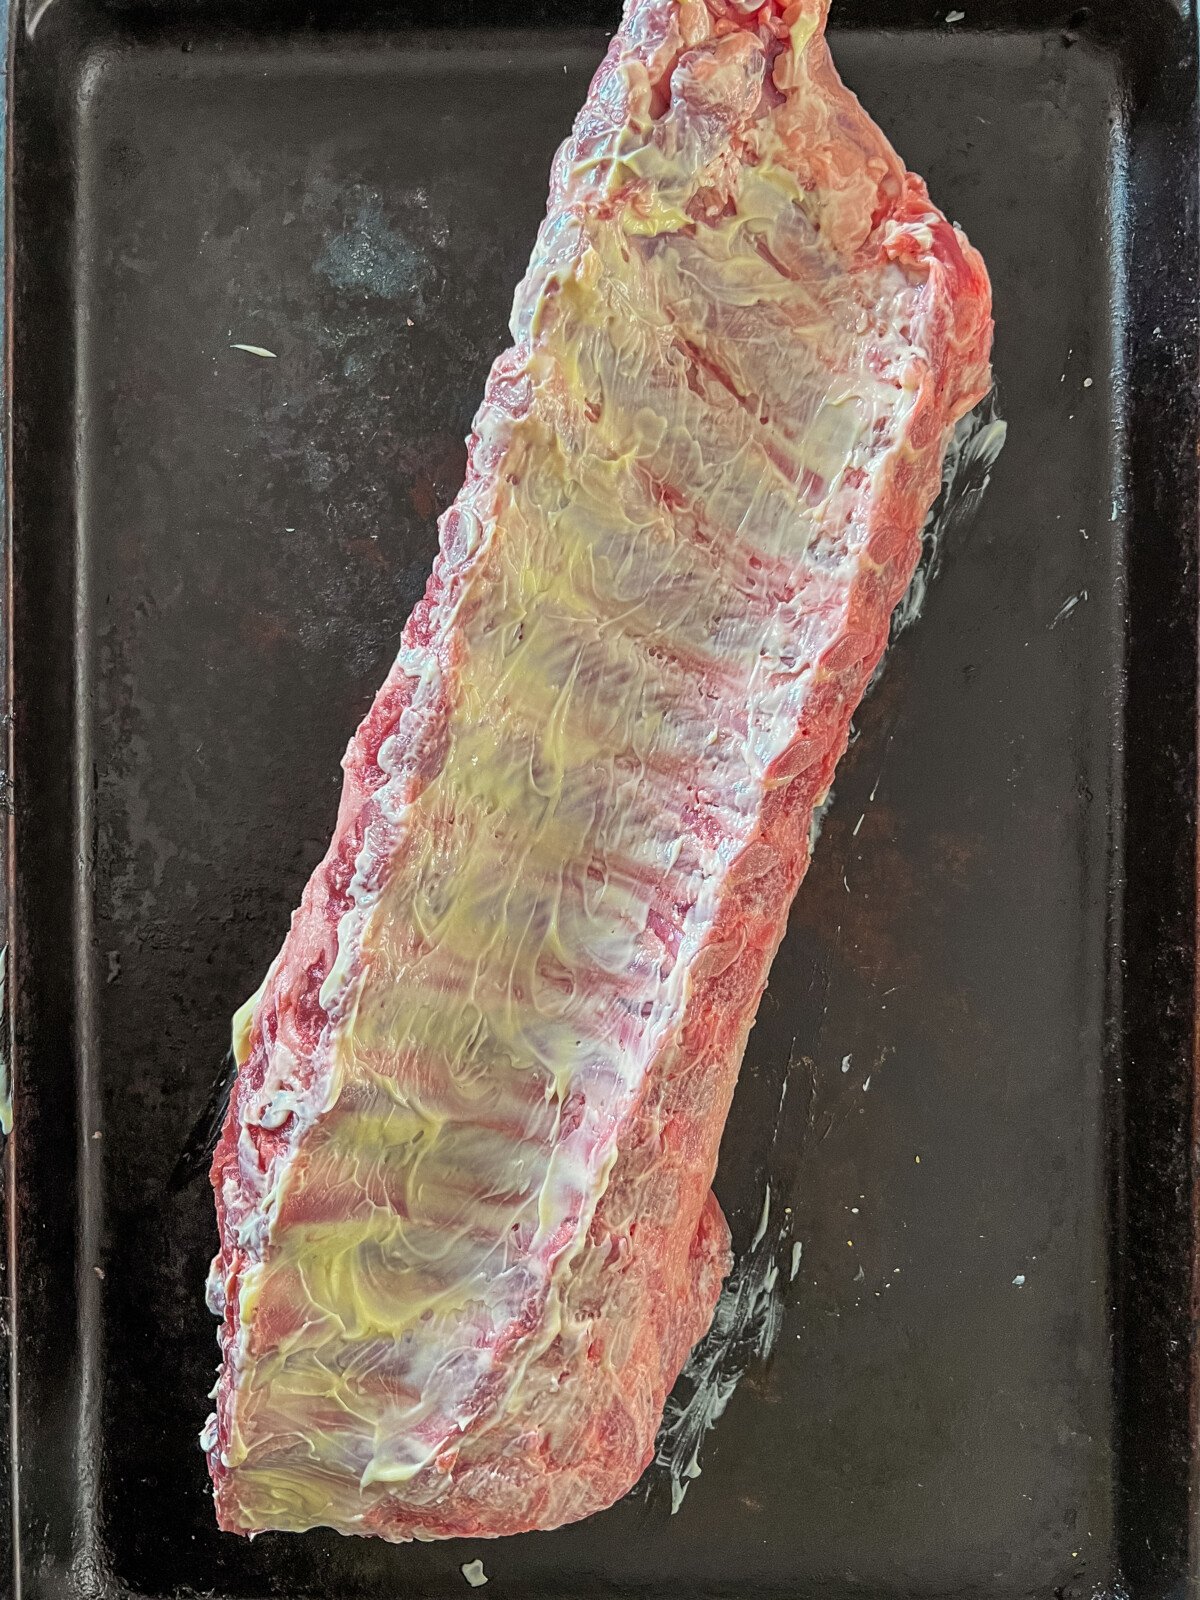 A rack of ribs, meat side down rubbed with mayo.